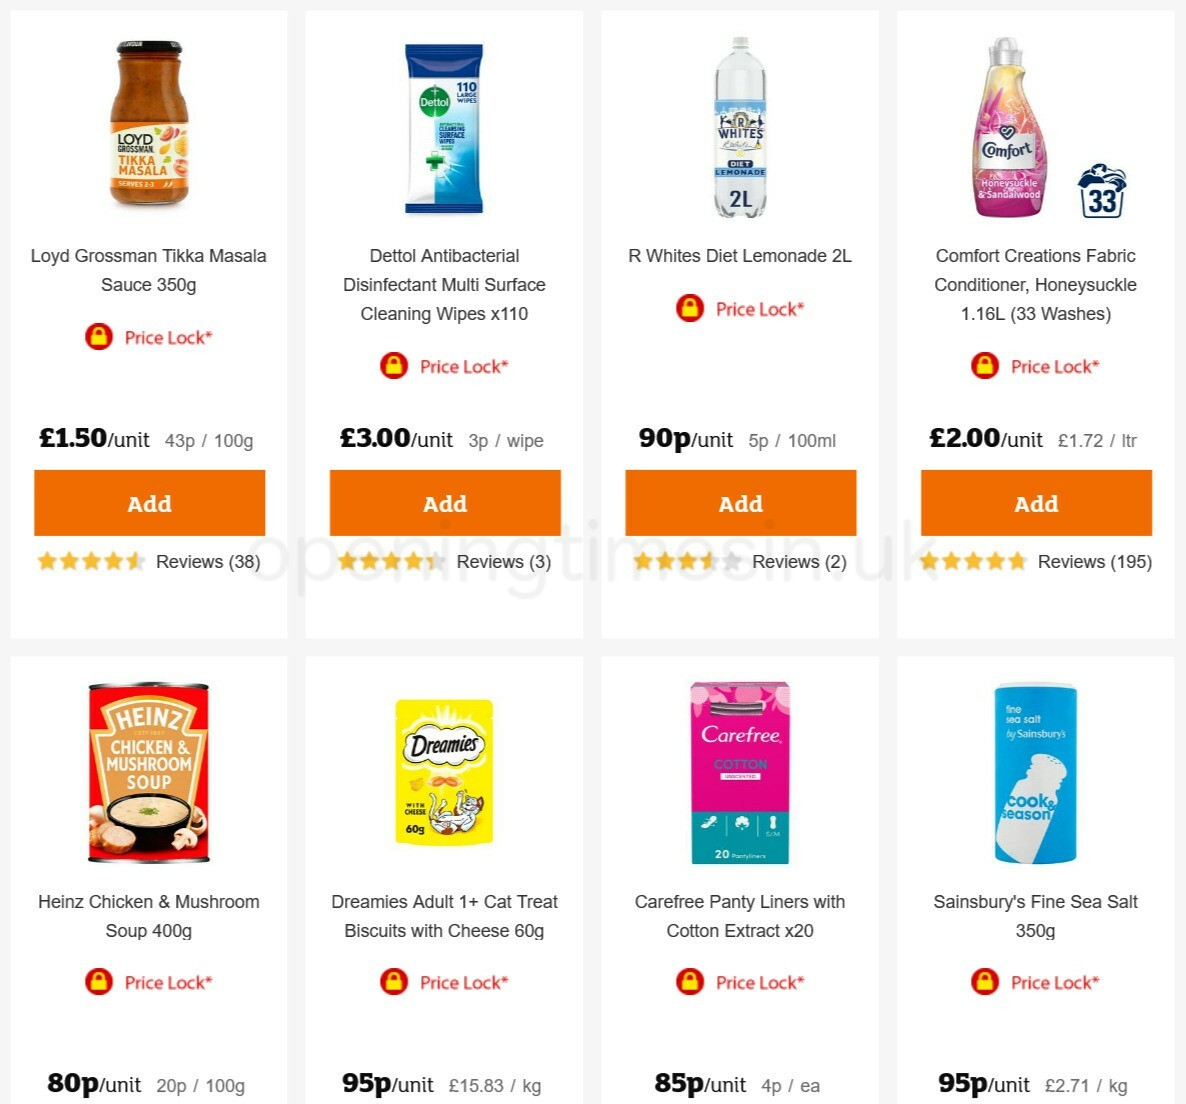 Sainsbury's Offers from 2 April